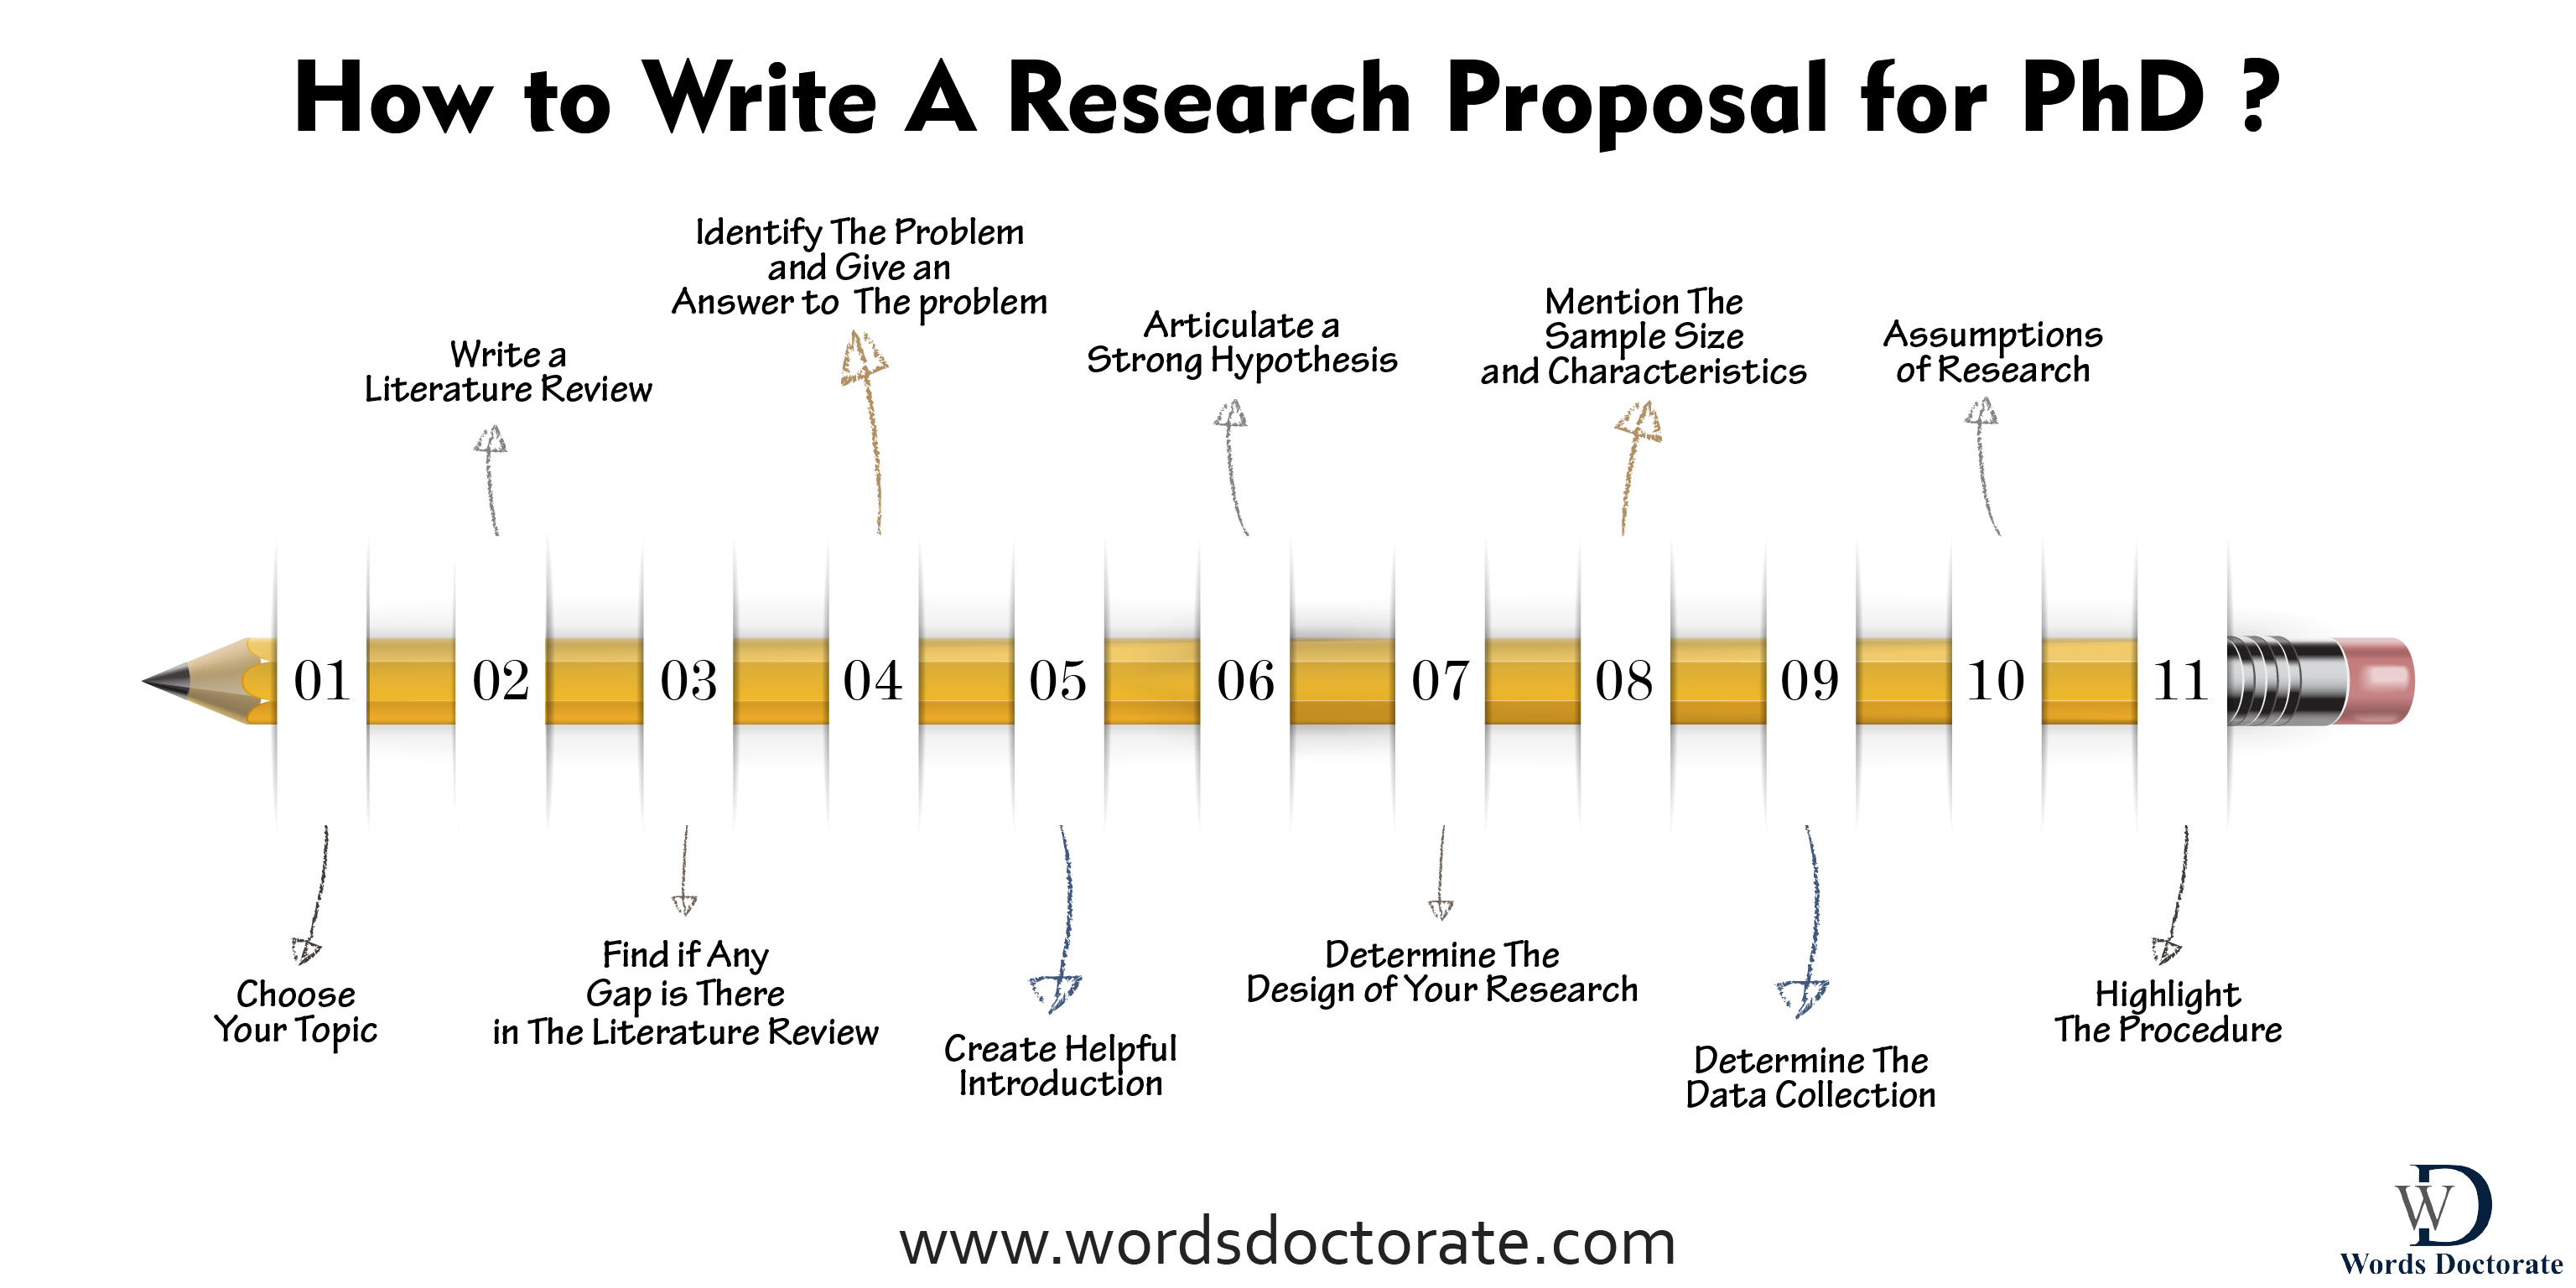 who to write a research proposal